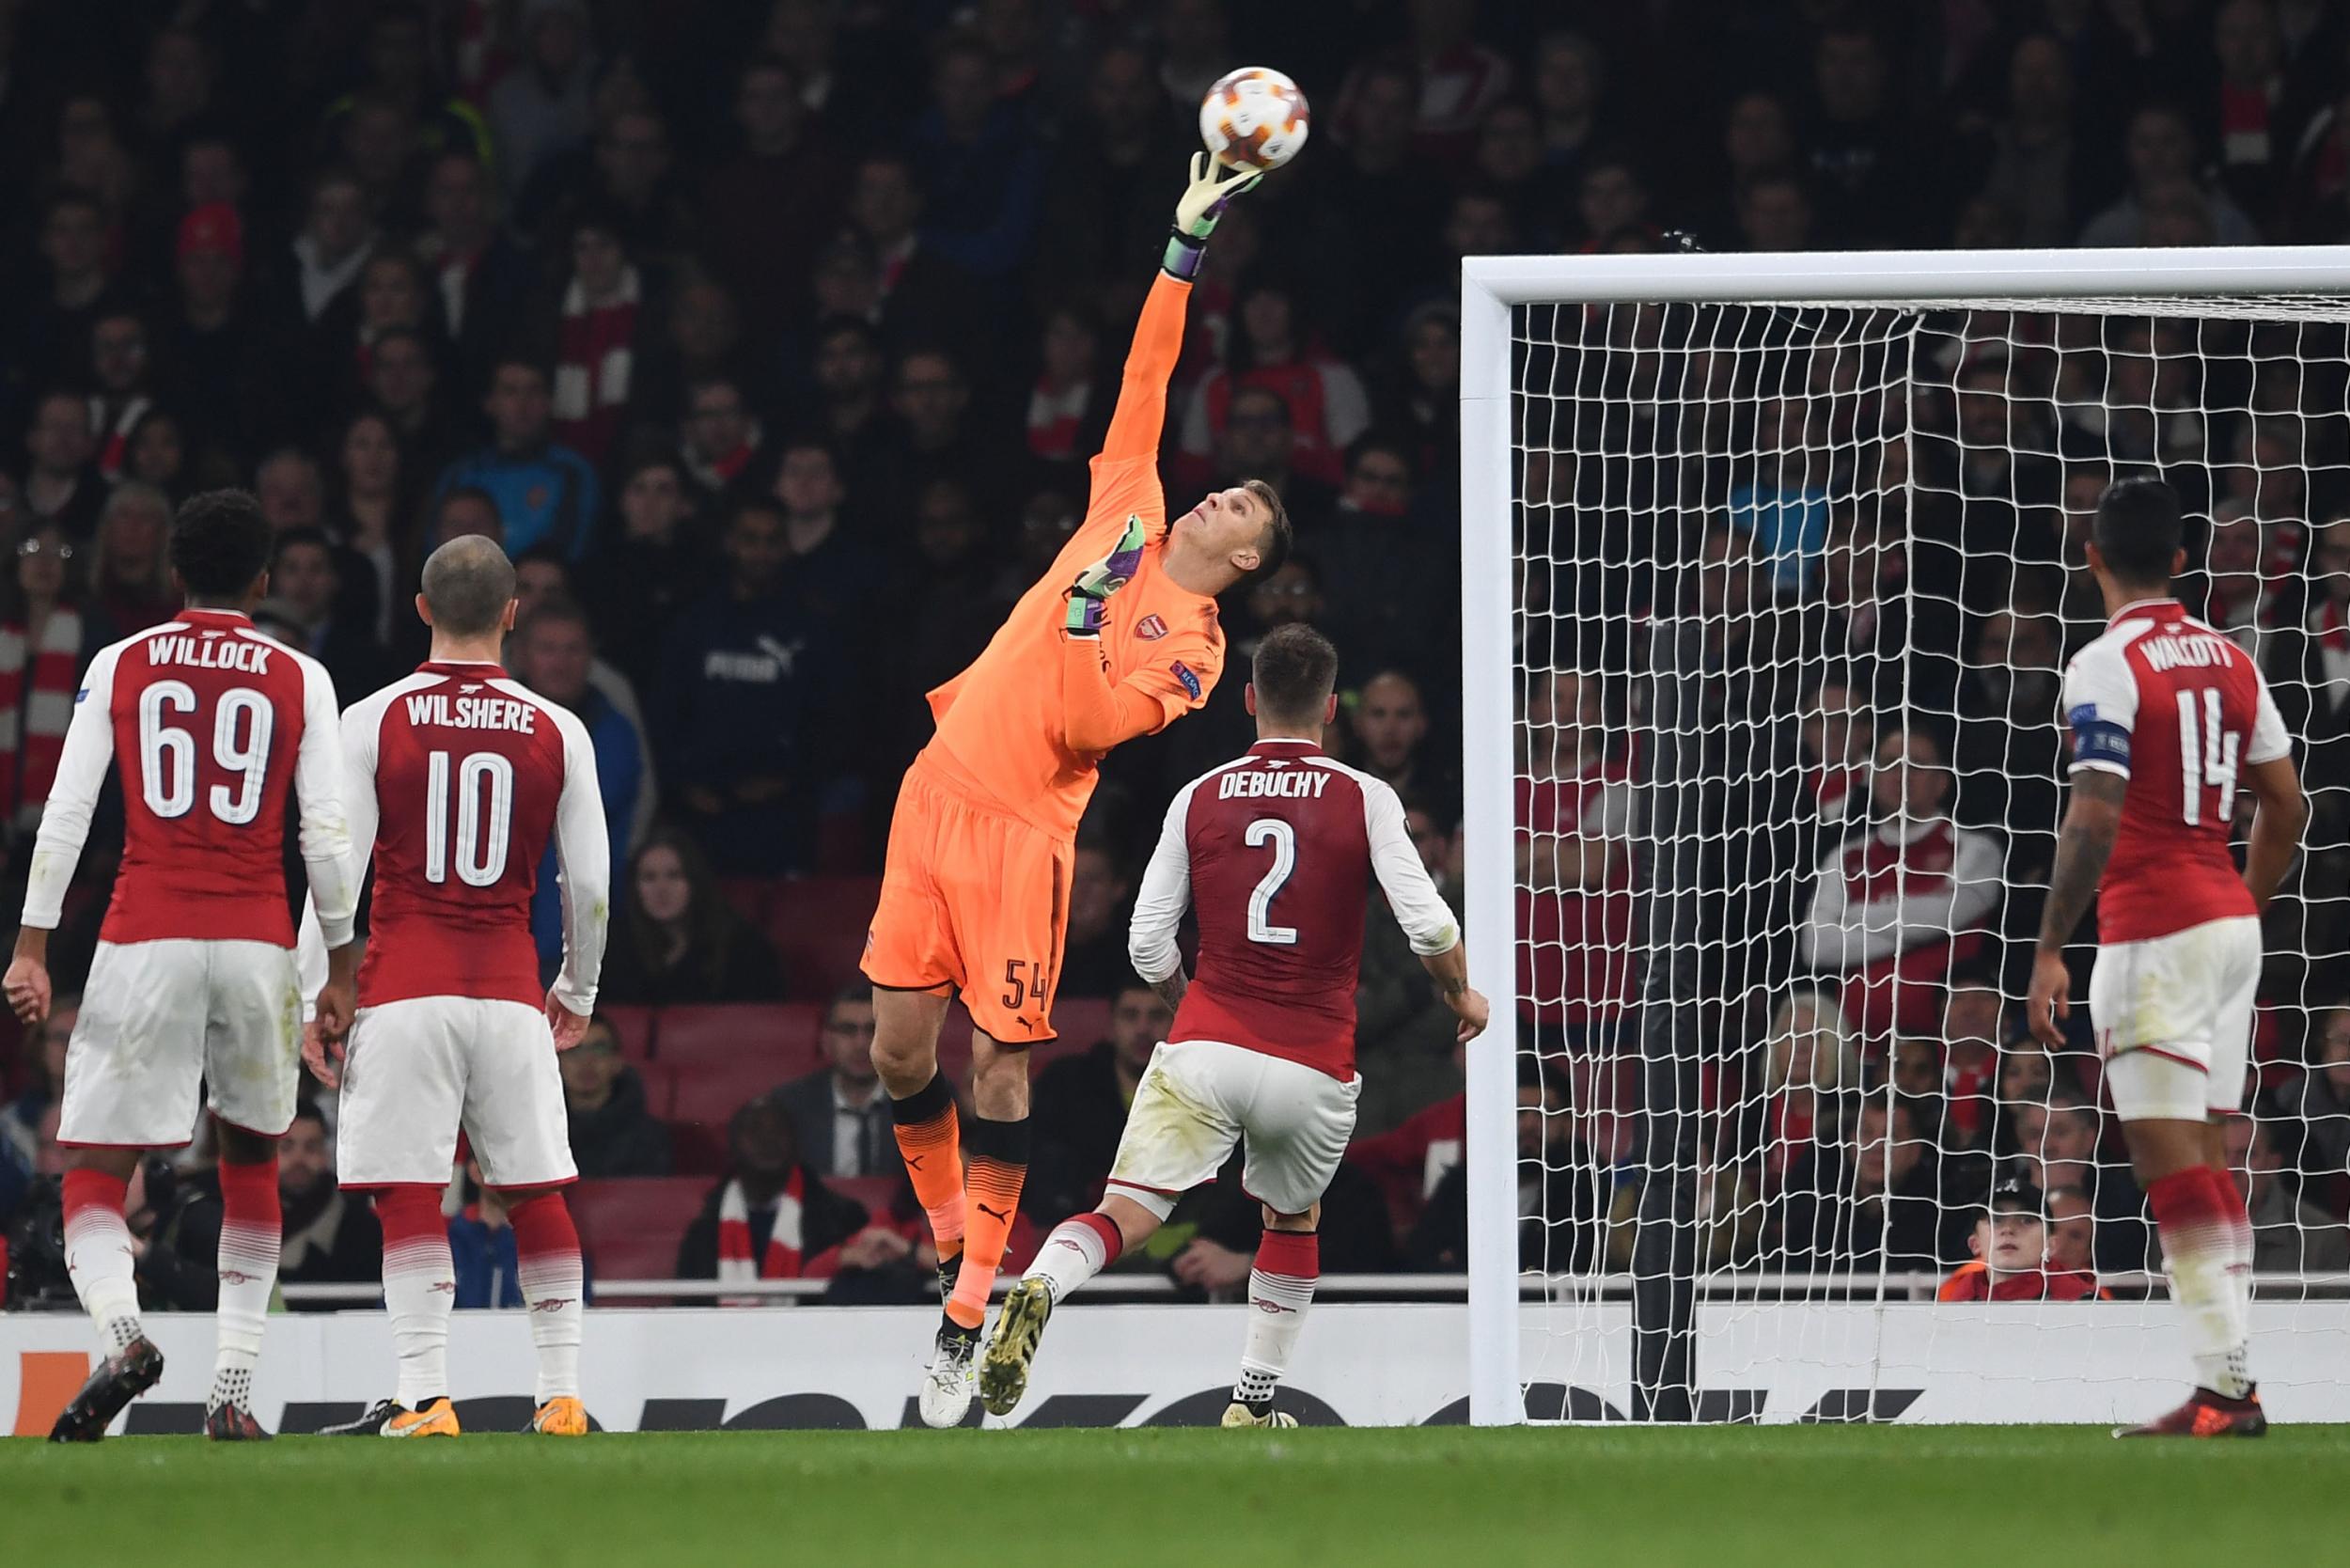 Matt Macey makes a save for Arsenal in the second half